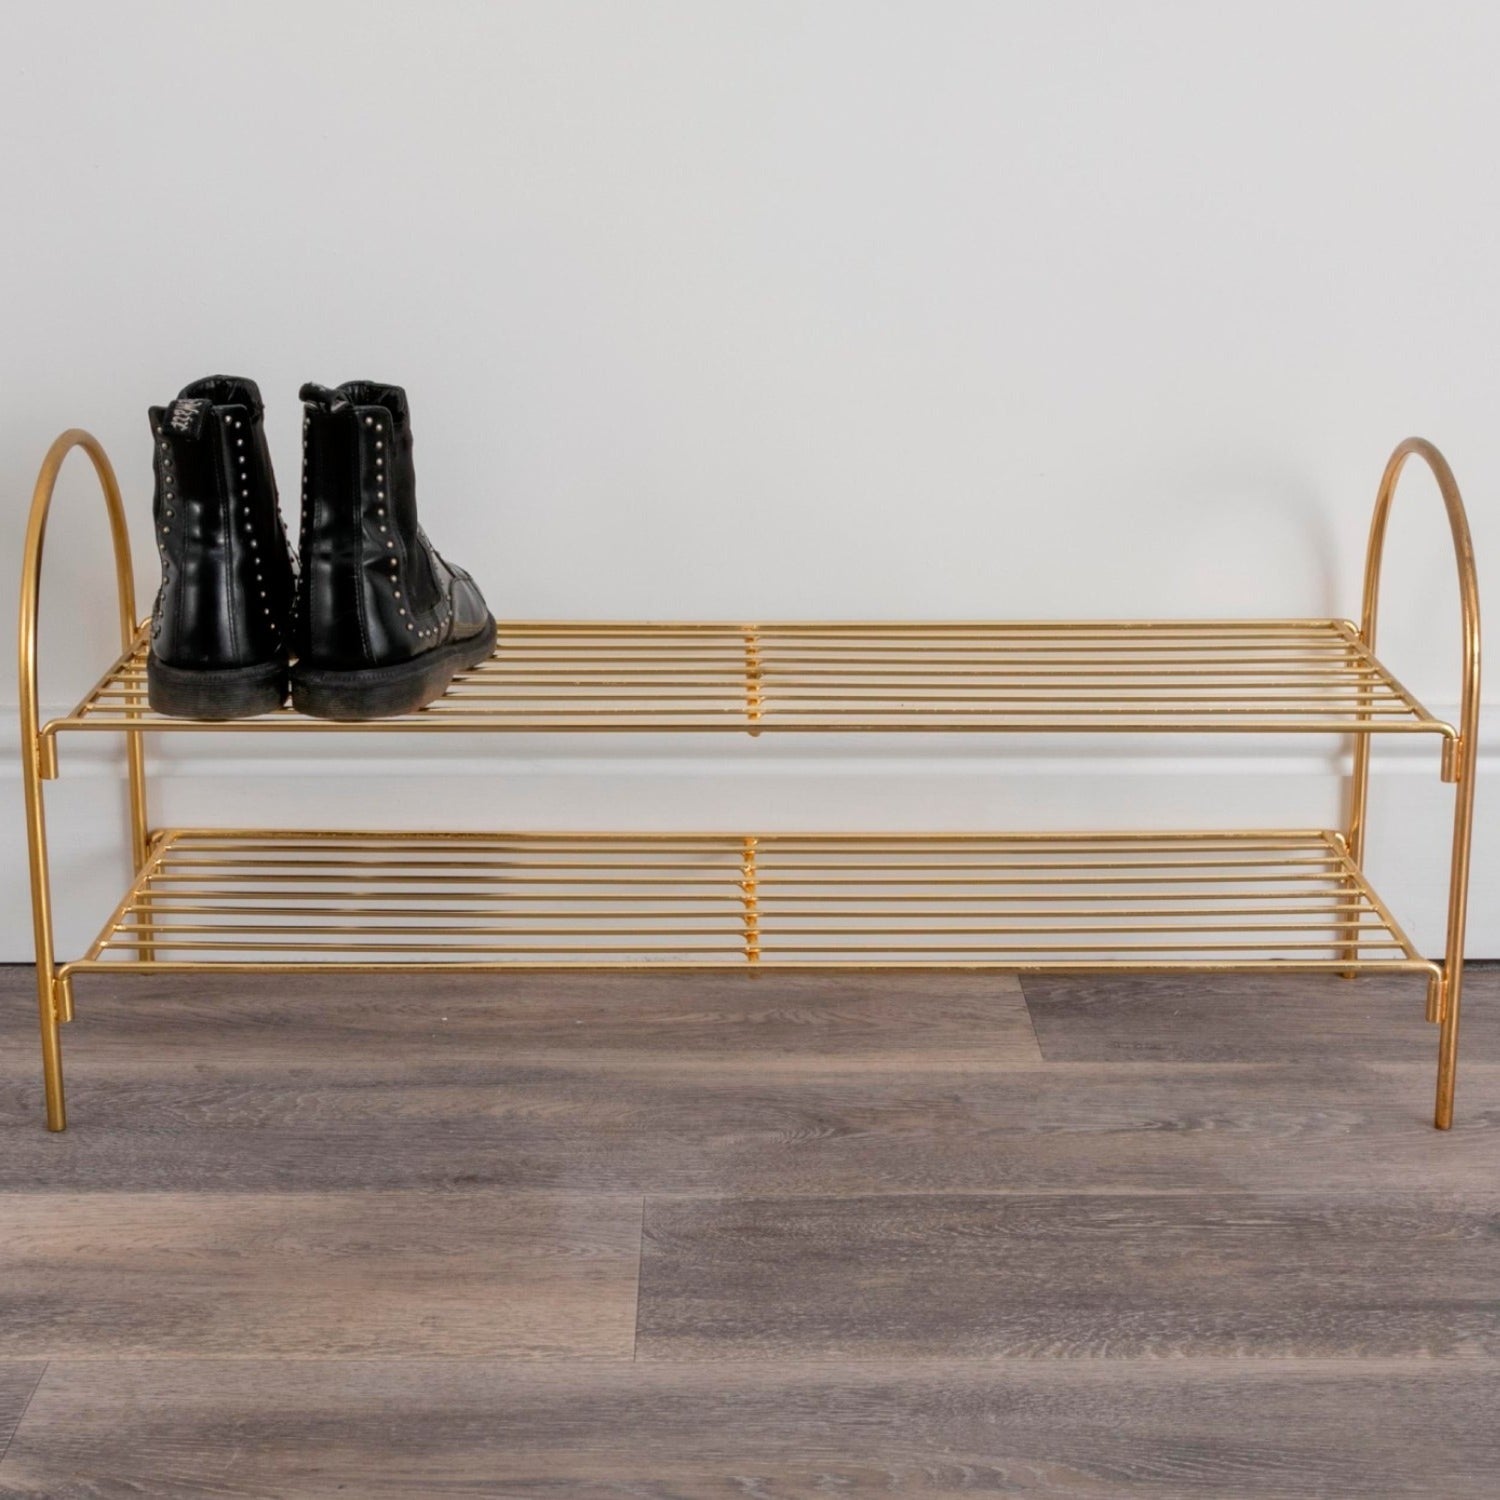 Gold shoe rack by Native